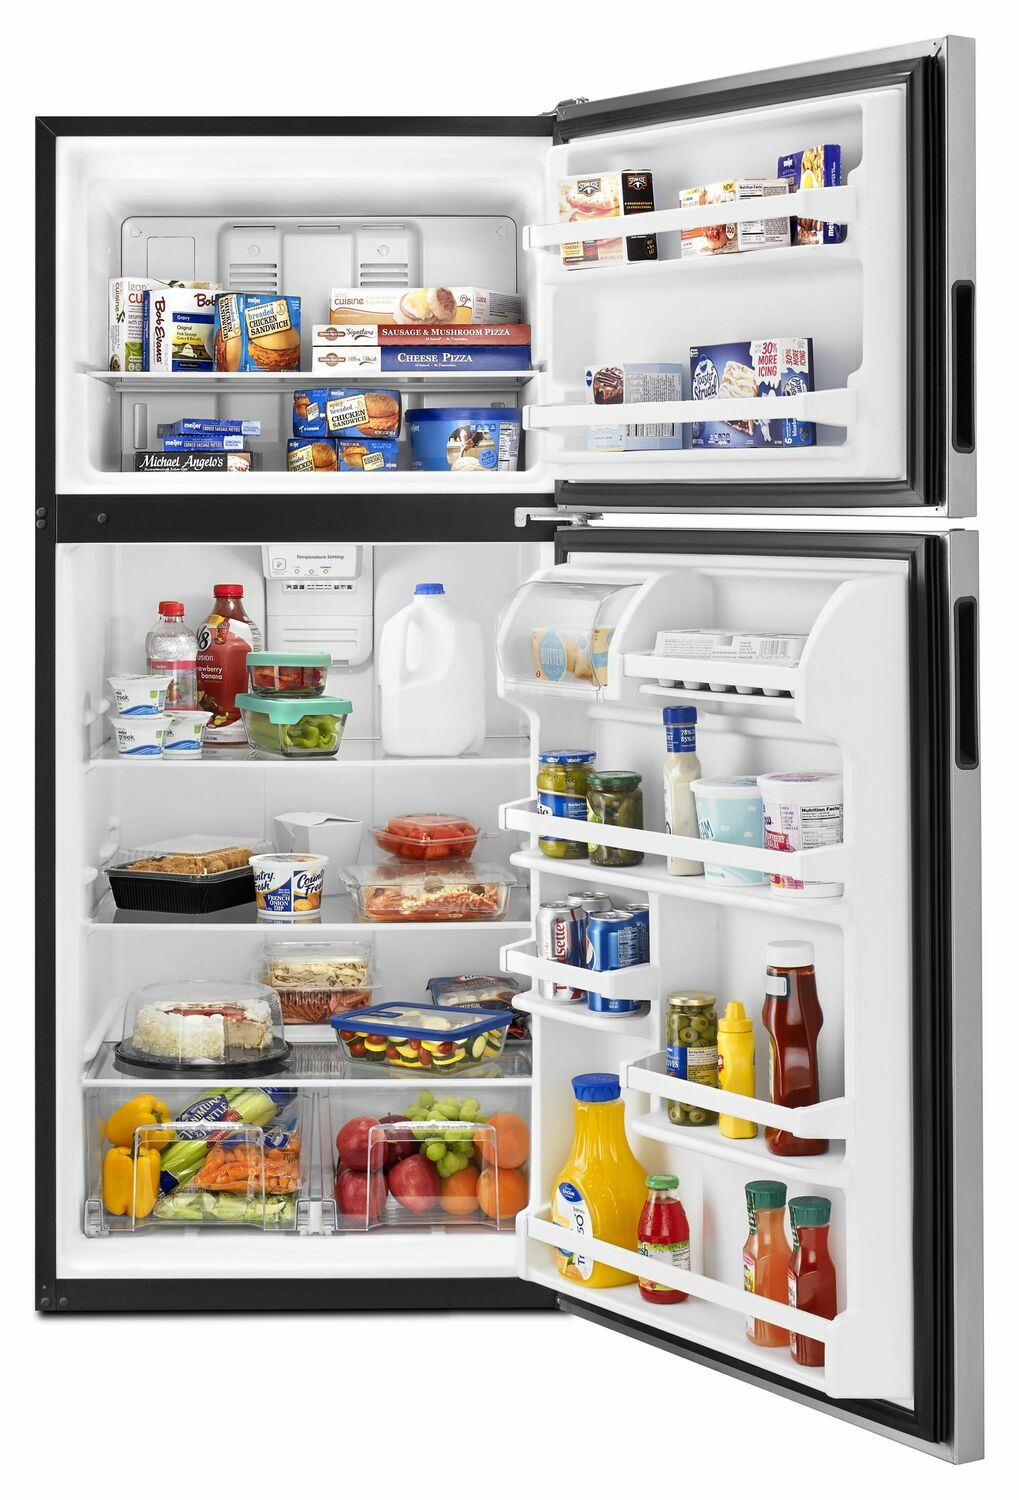 Load image into Gallery viewer, Amana ART318FFDS 30-Inch Amana® Top-Freezer Refrigerator With Glass Shelves - Stainless Steel
